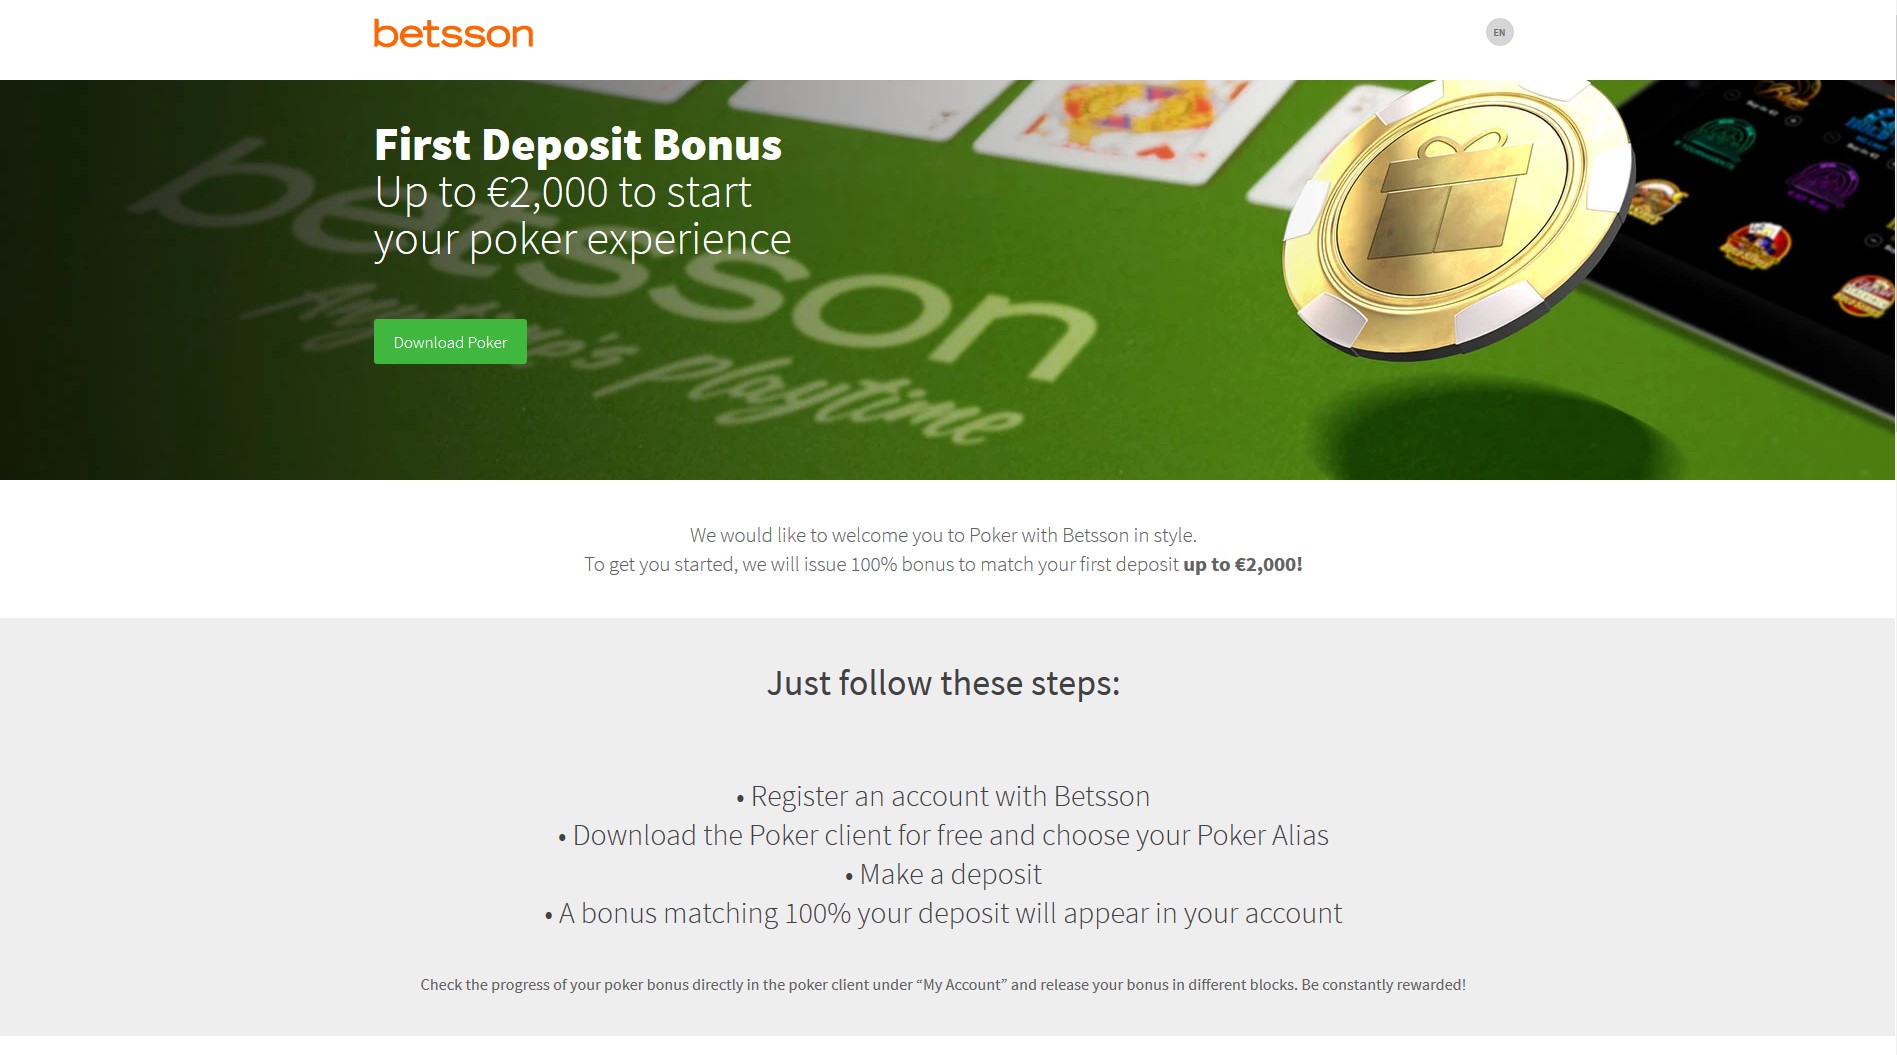 Betsson Scam or Not? +++ Our Review 2022 from Scams.info